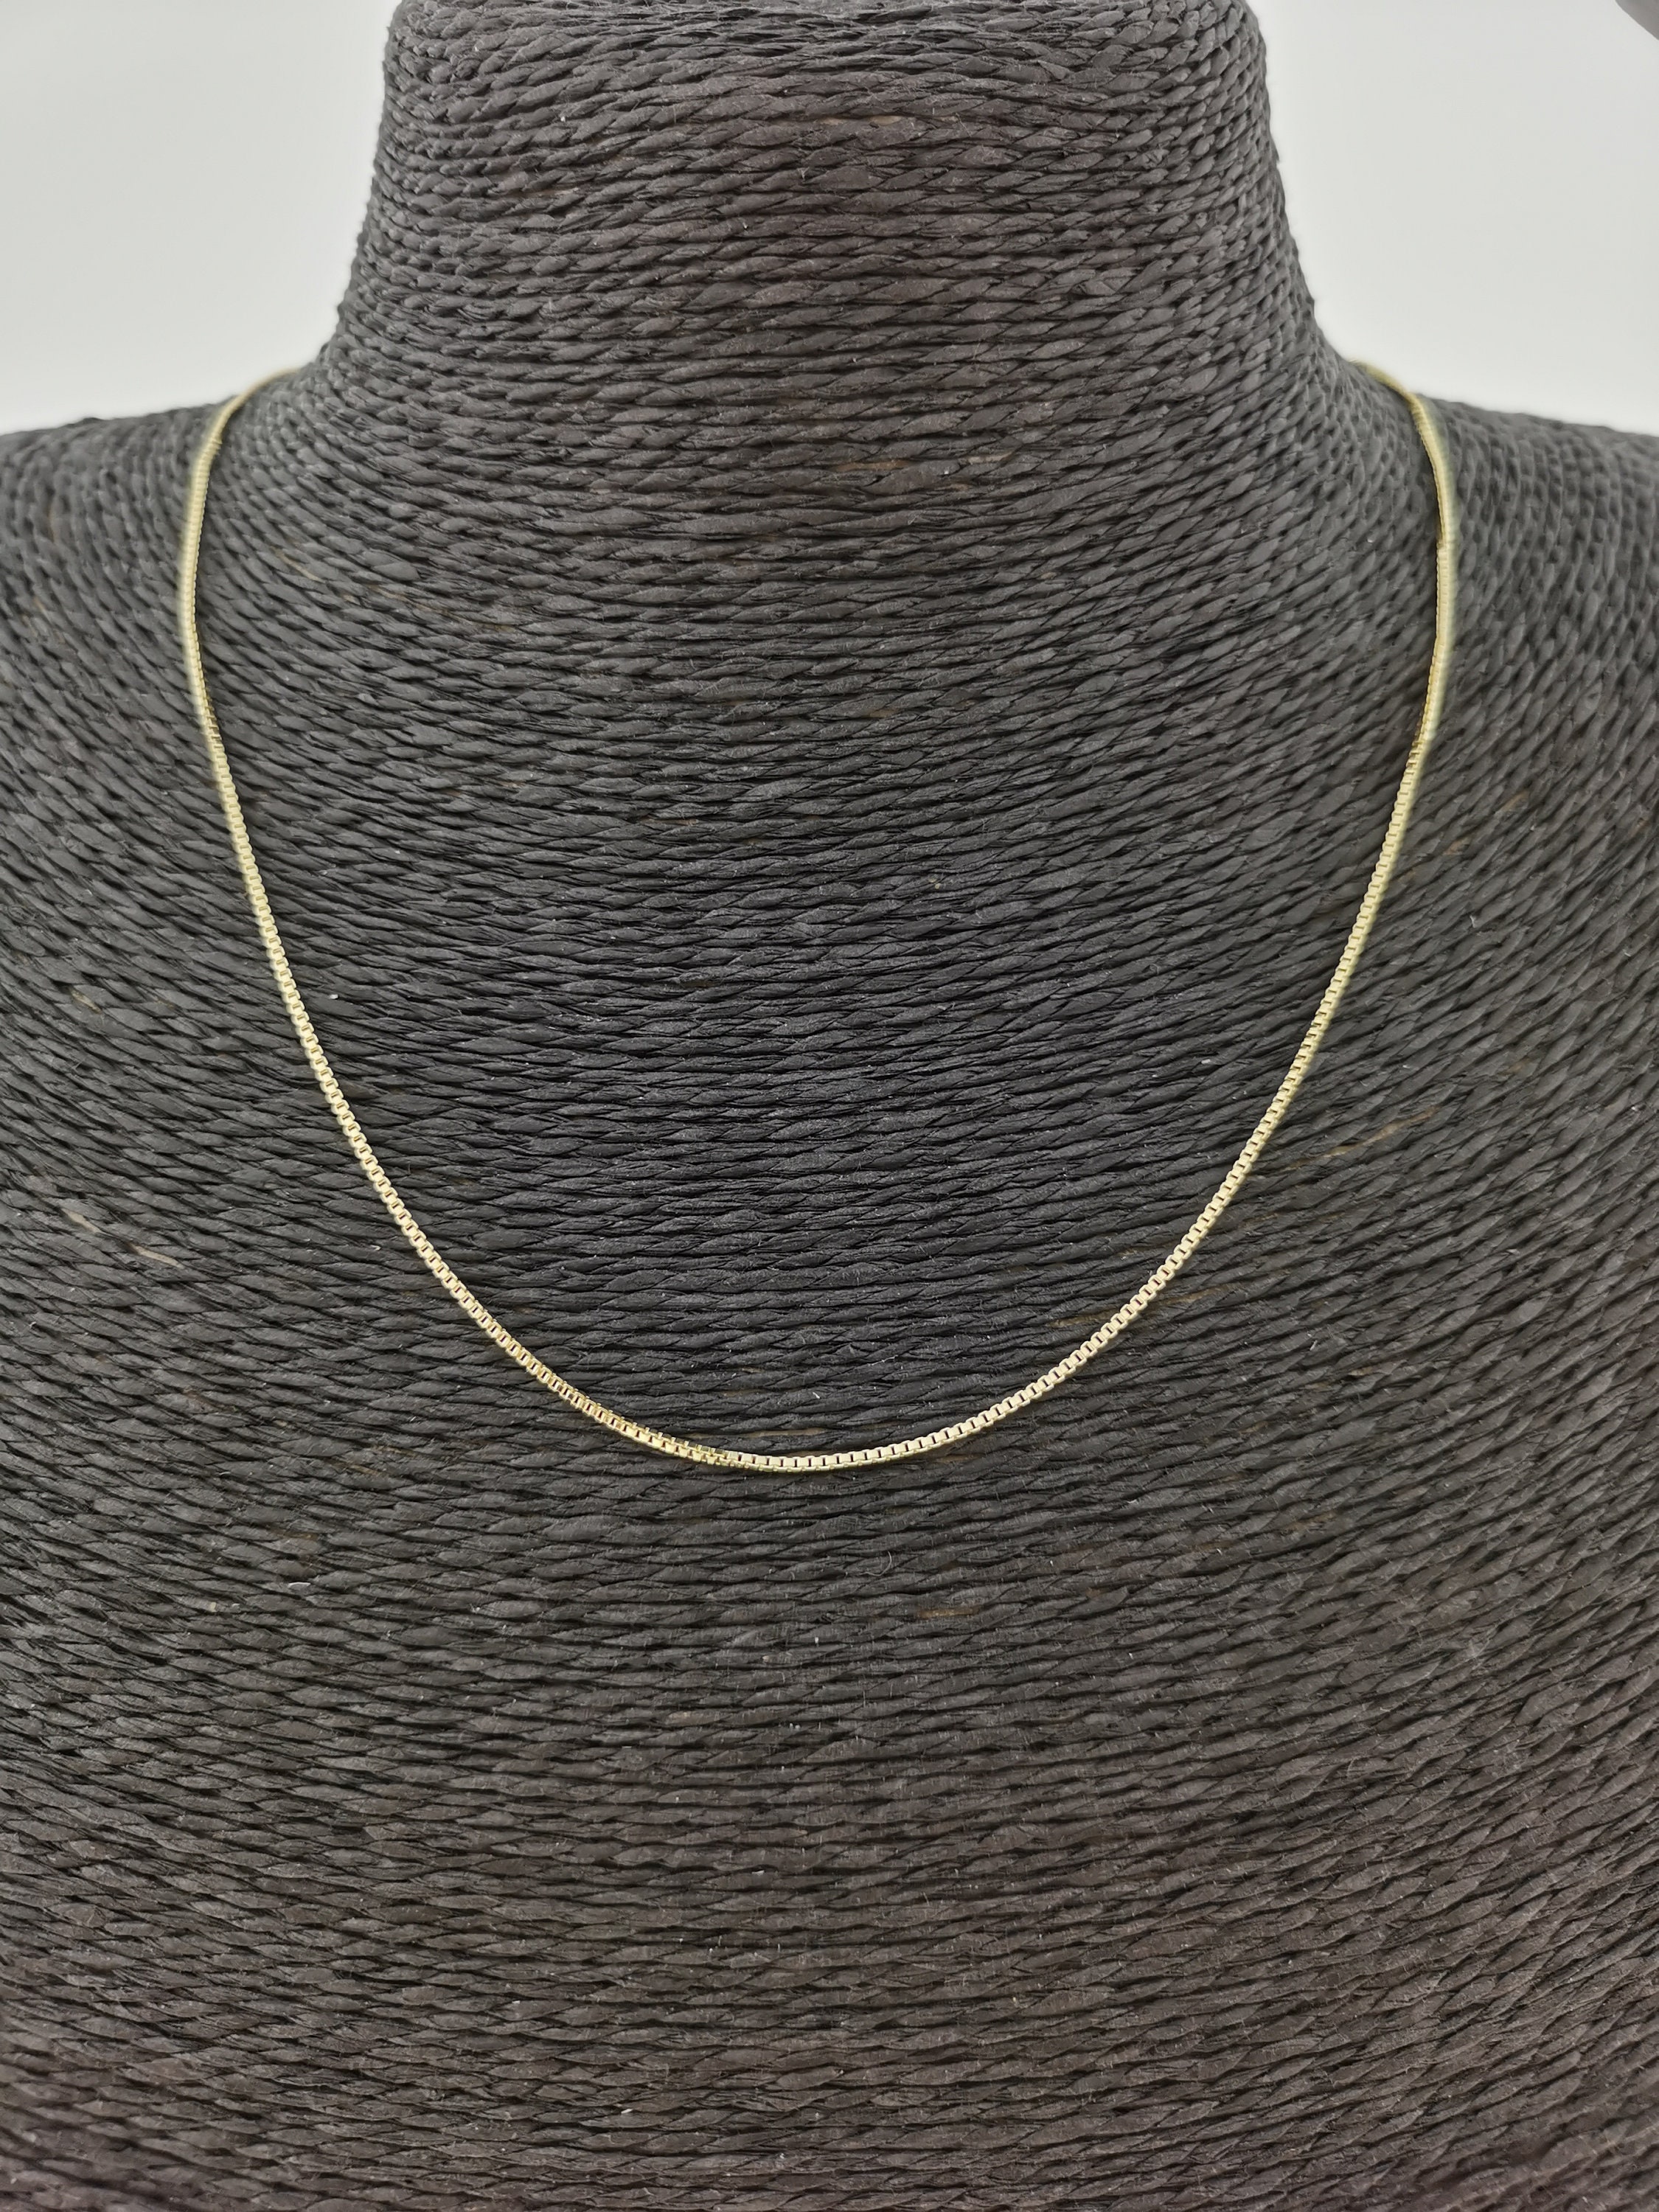 Monet Jewelry Gold Tone 17 Inch Rope Collar Necklace | Hamilton Place